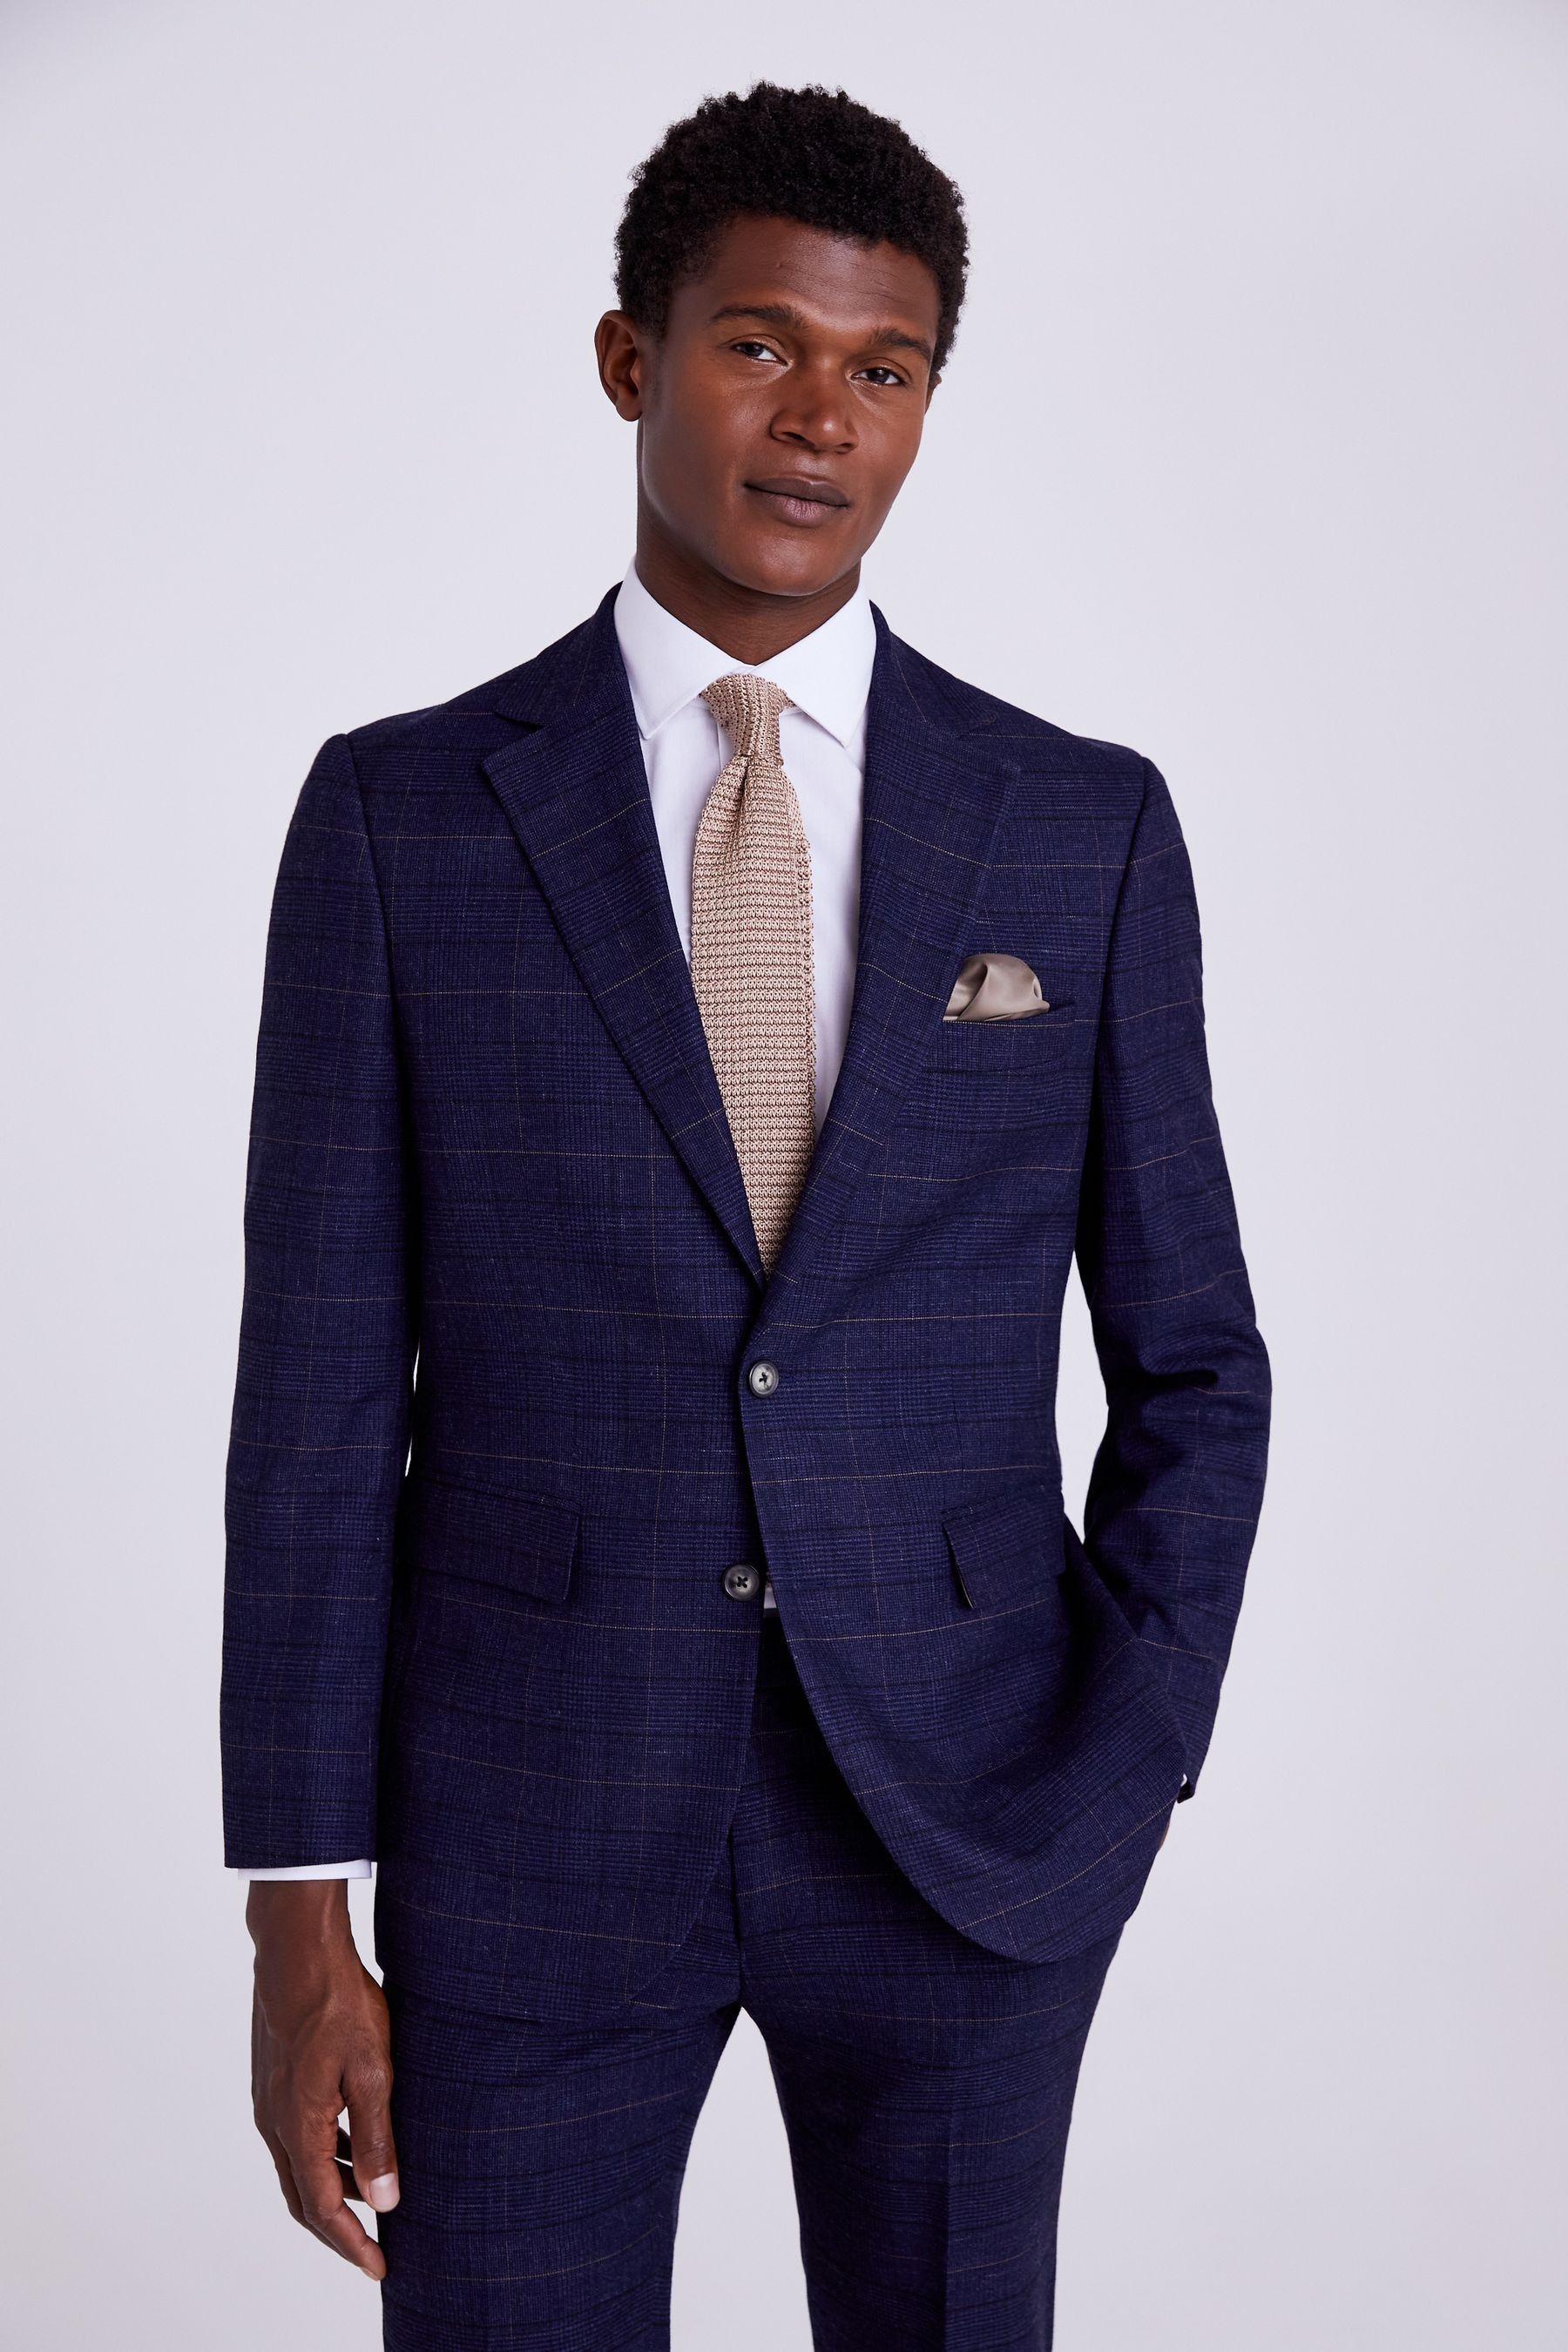 Buy MOSS Navy Blue Slim Fit Check Suit: Jacket from the Next UK online shop